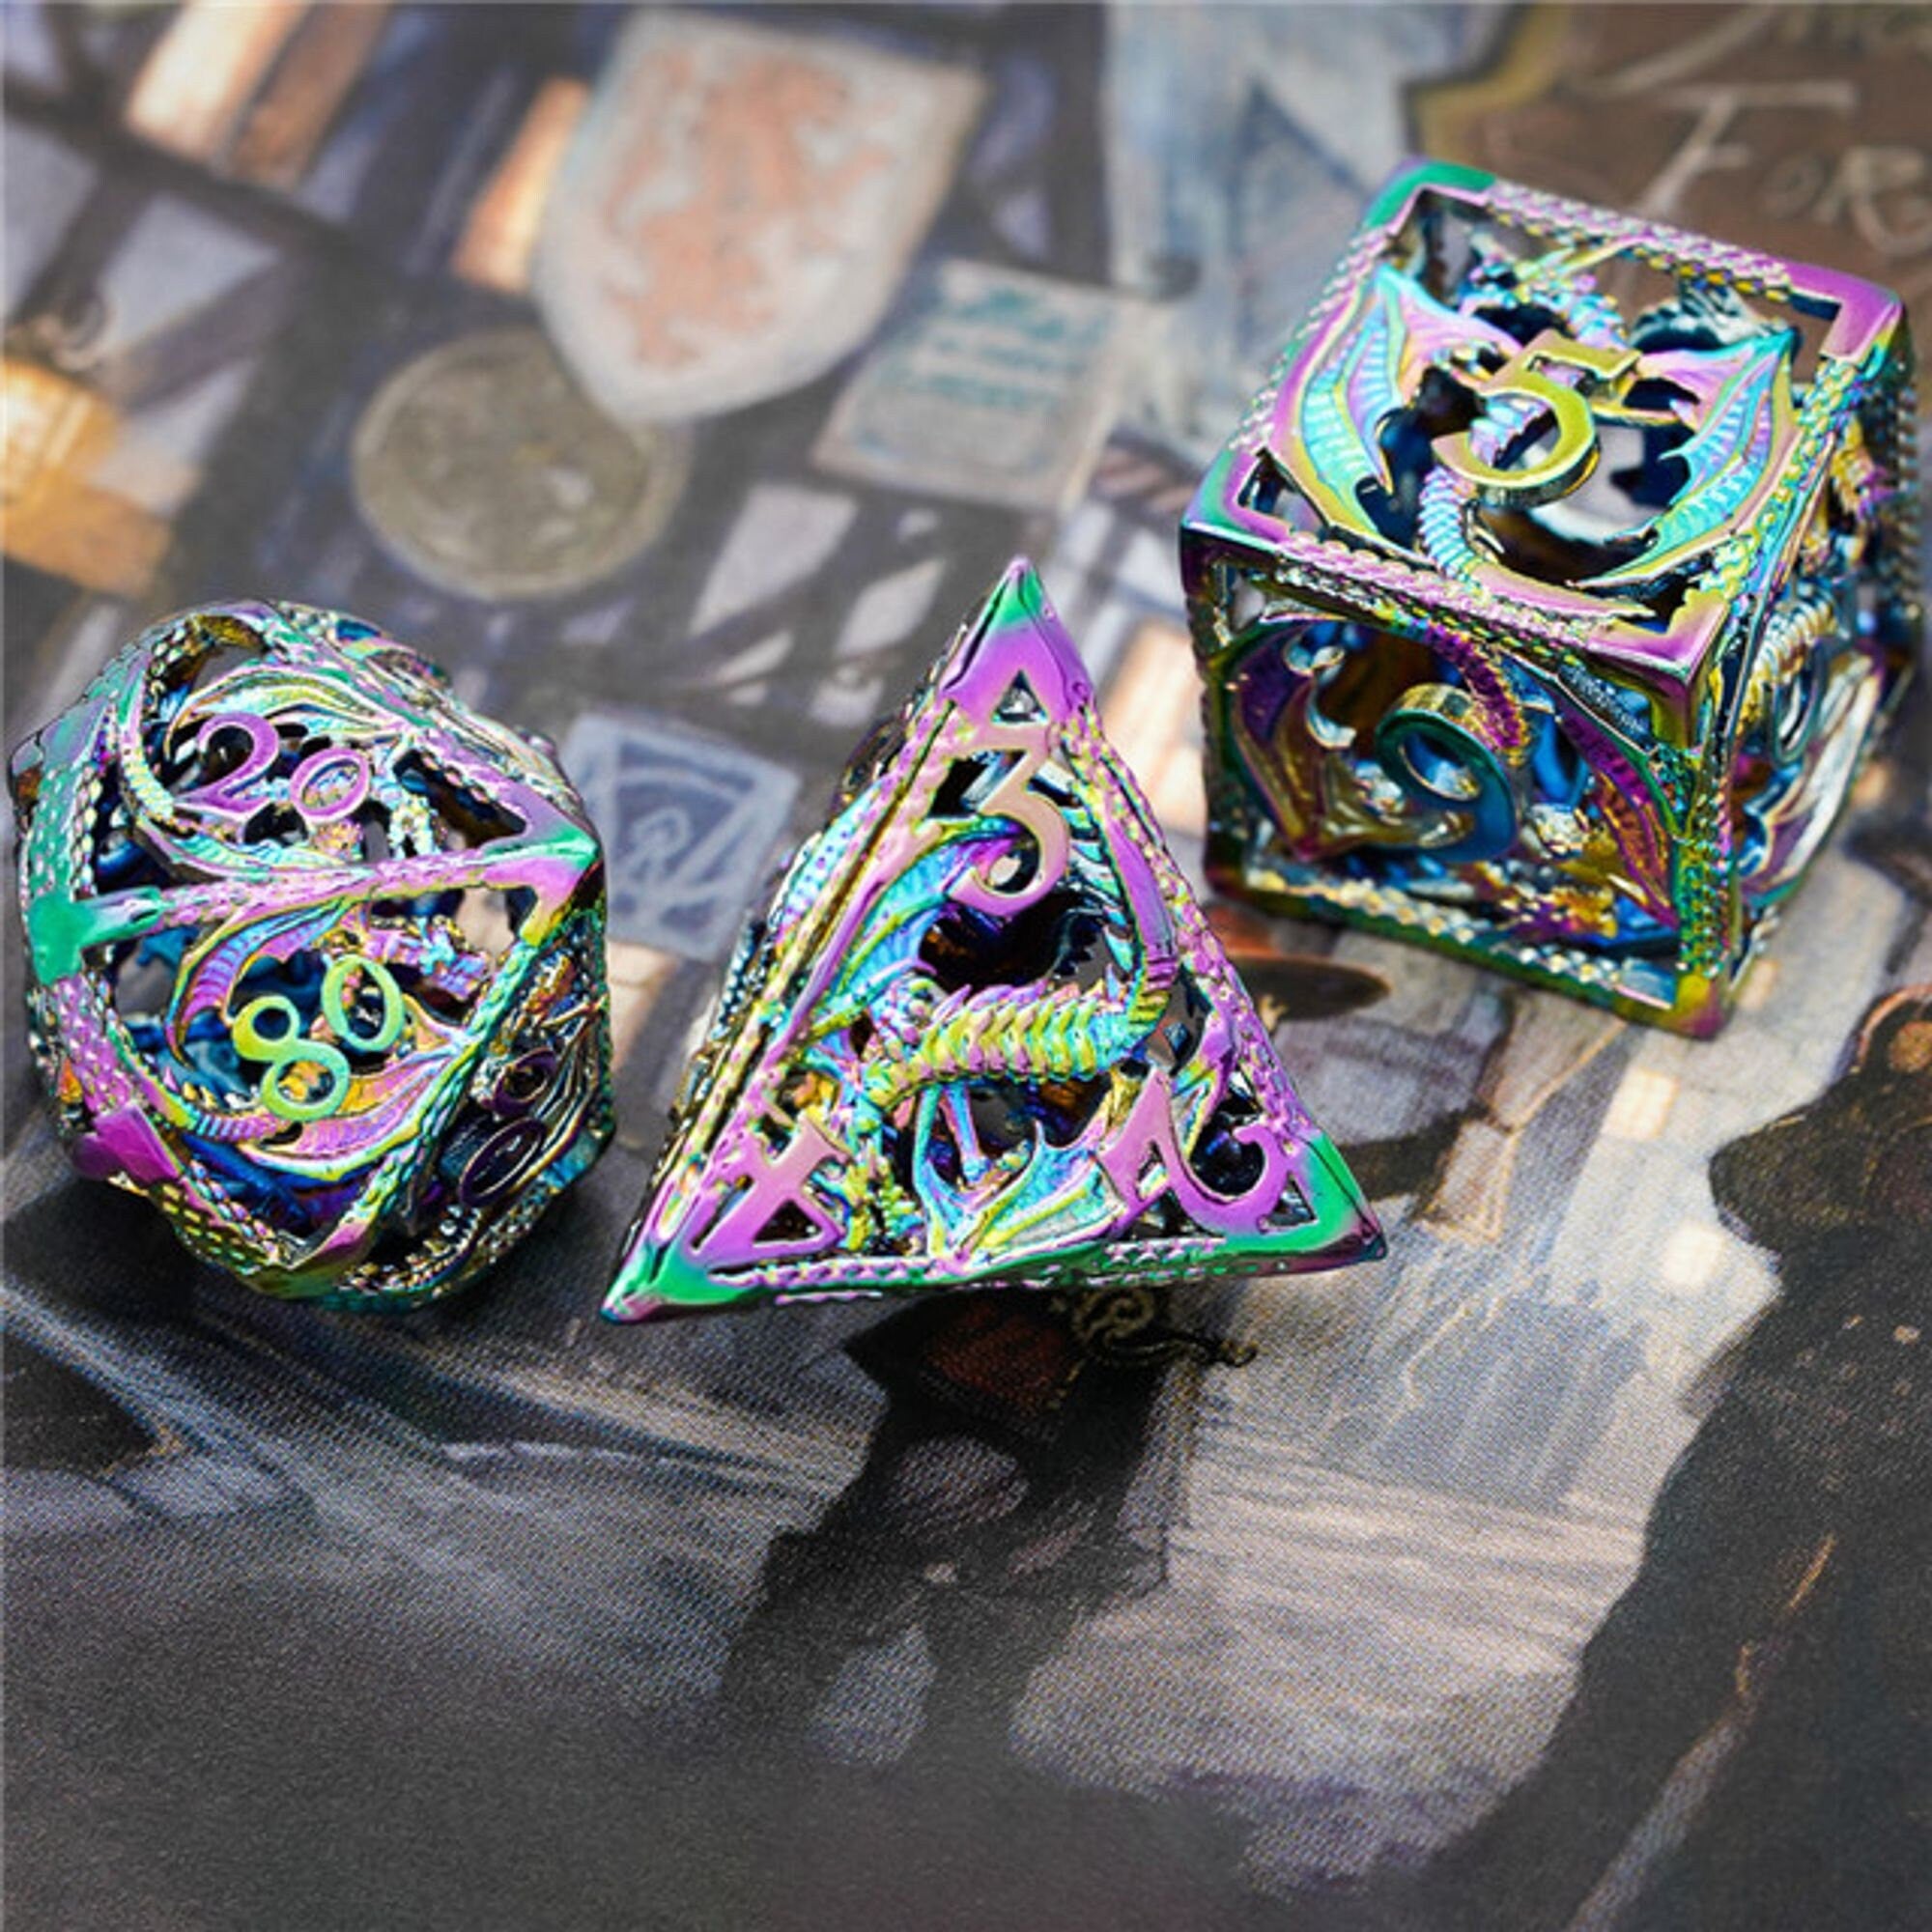 Hollow Holographic Draconic Flying Dragon Metal TTRPG/DND DICE SET - Dicemaniac